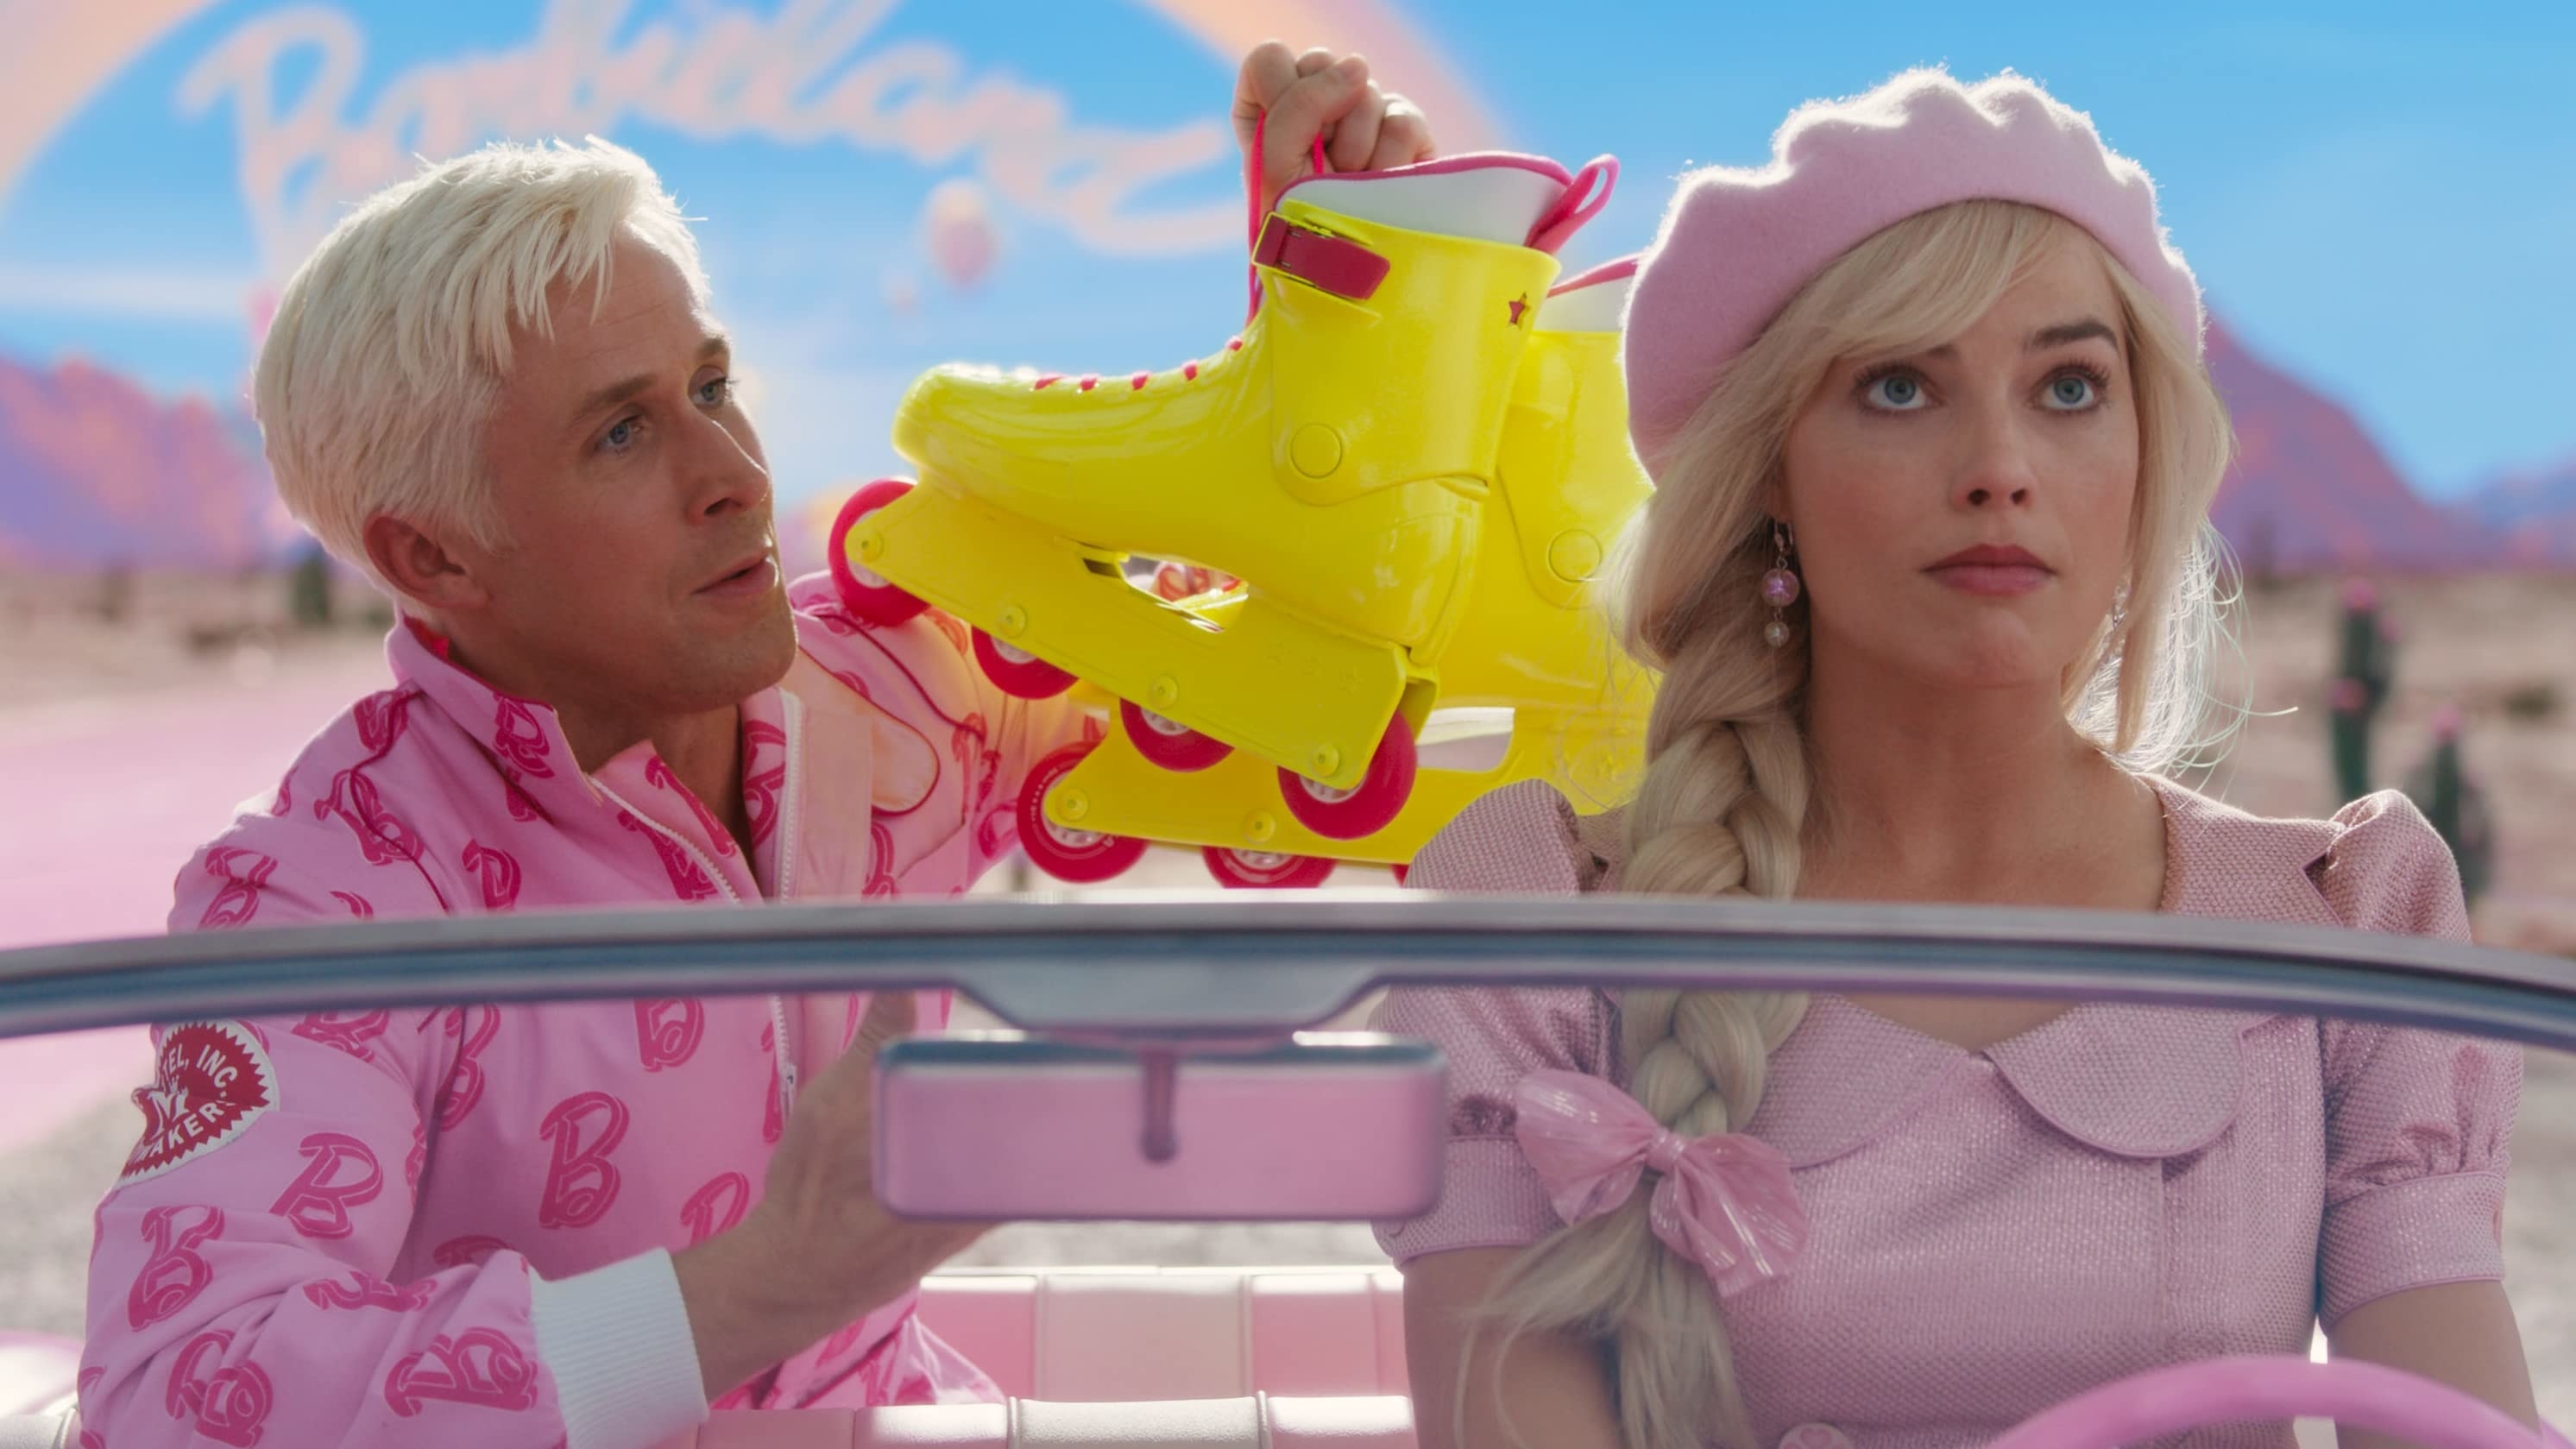 Barbie driving with Ken in the backseat holding up a pair of rollerblades